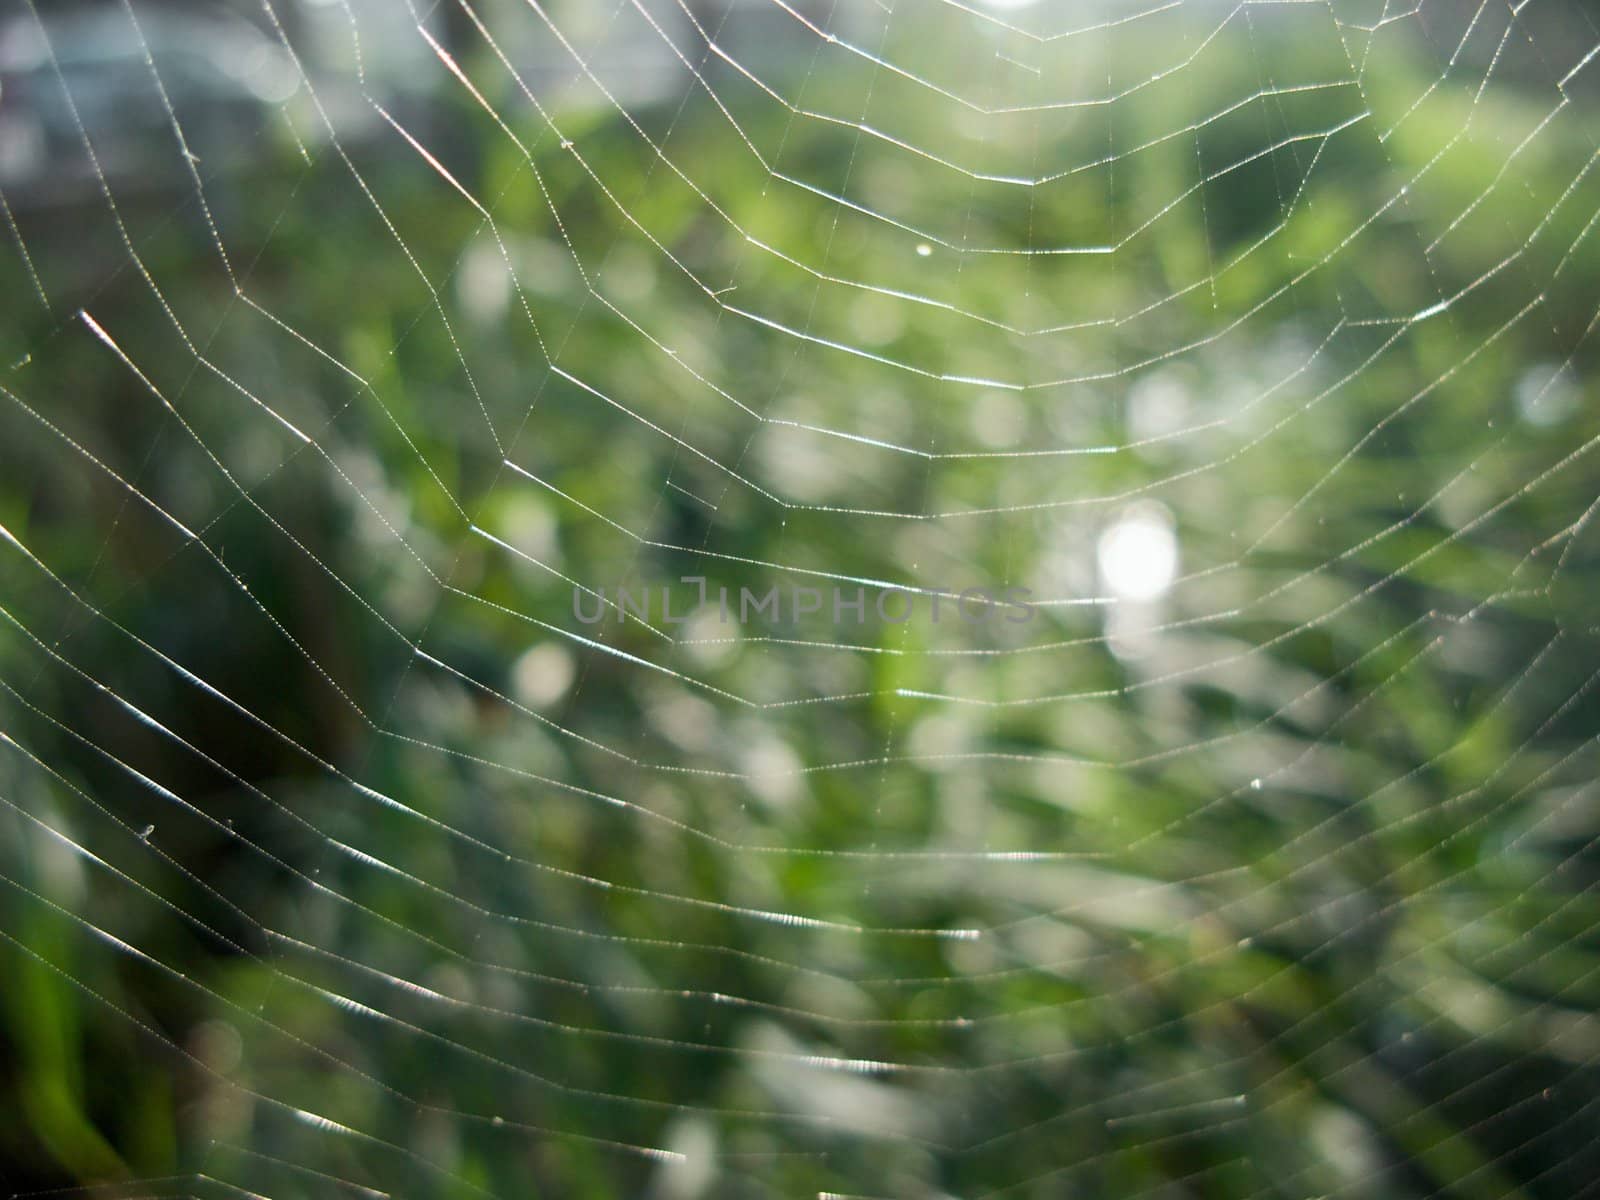 Spider's Web by alister